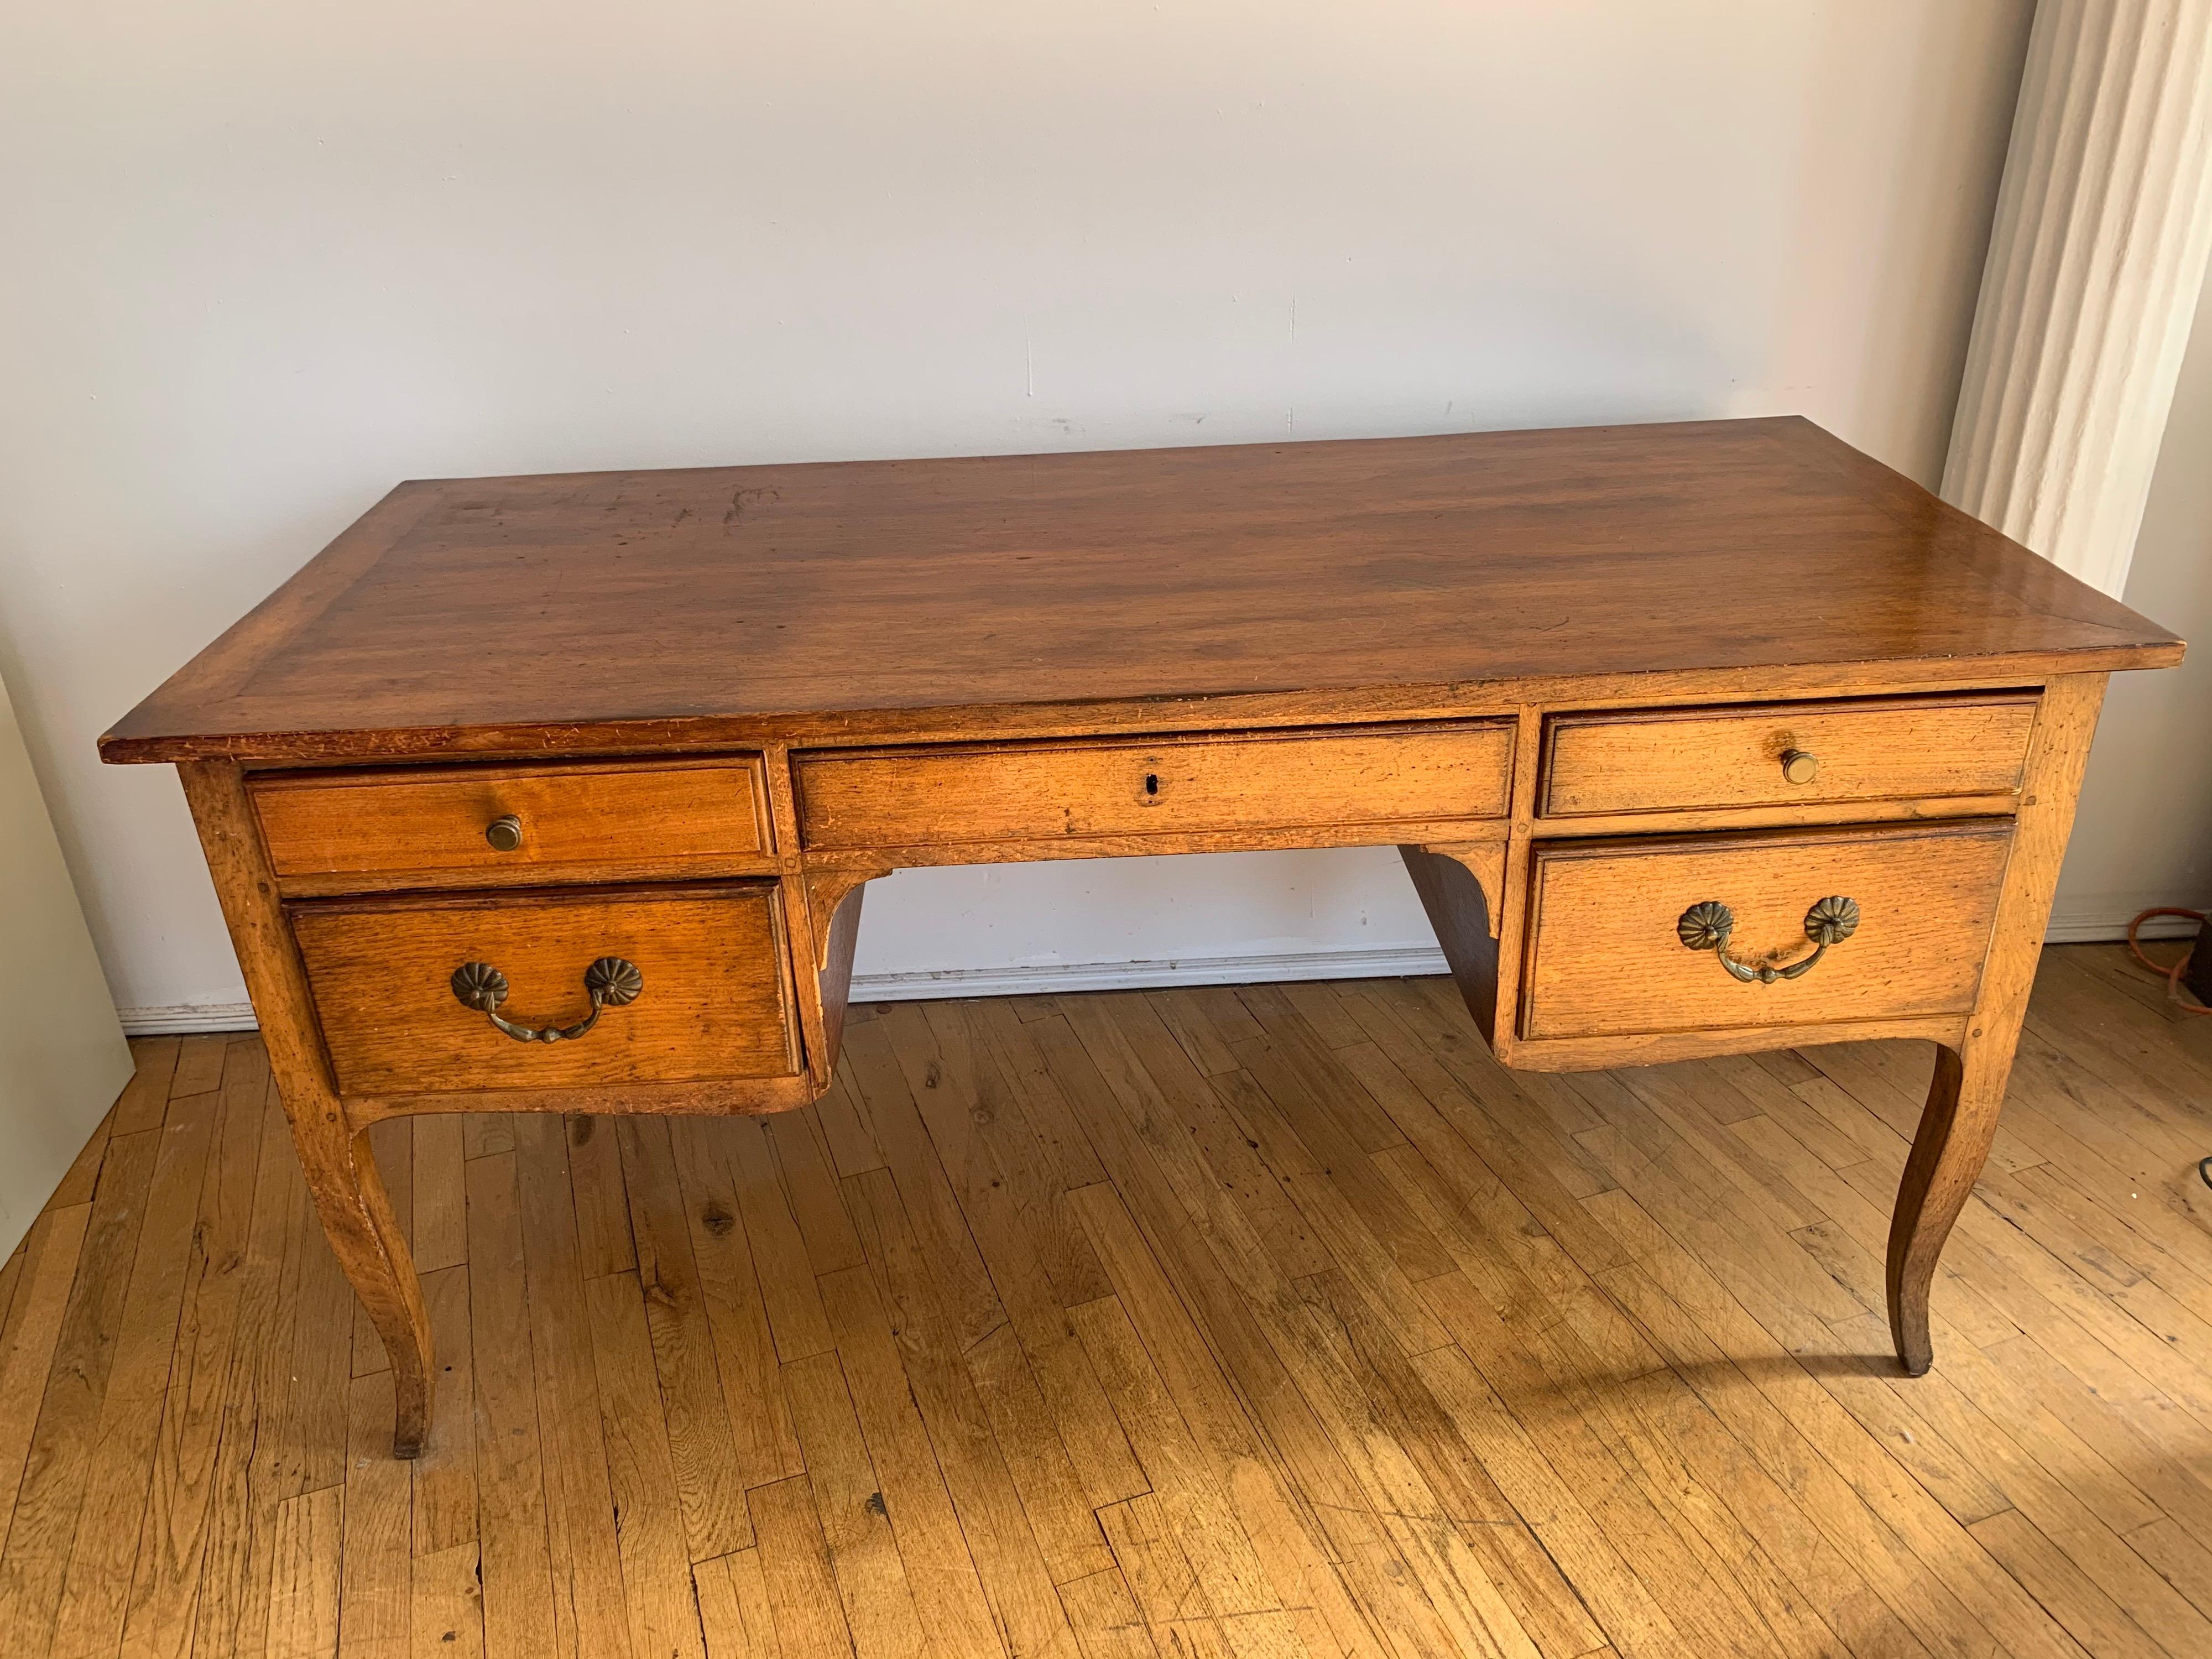 Antique French Provincial Louis V style desk.
A great looking desk with great scale. Three smaller drawers across and two drawers on either side of kneehole. Sitting on cabriole legs.
Missing key to center drawer and escutcheon; all other hardware